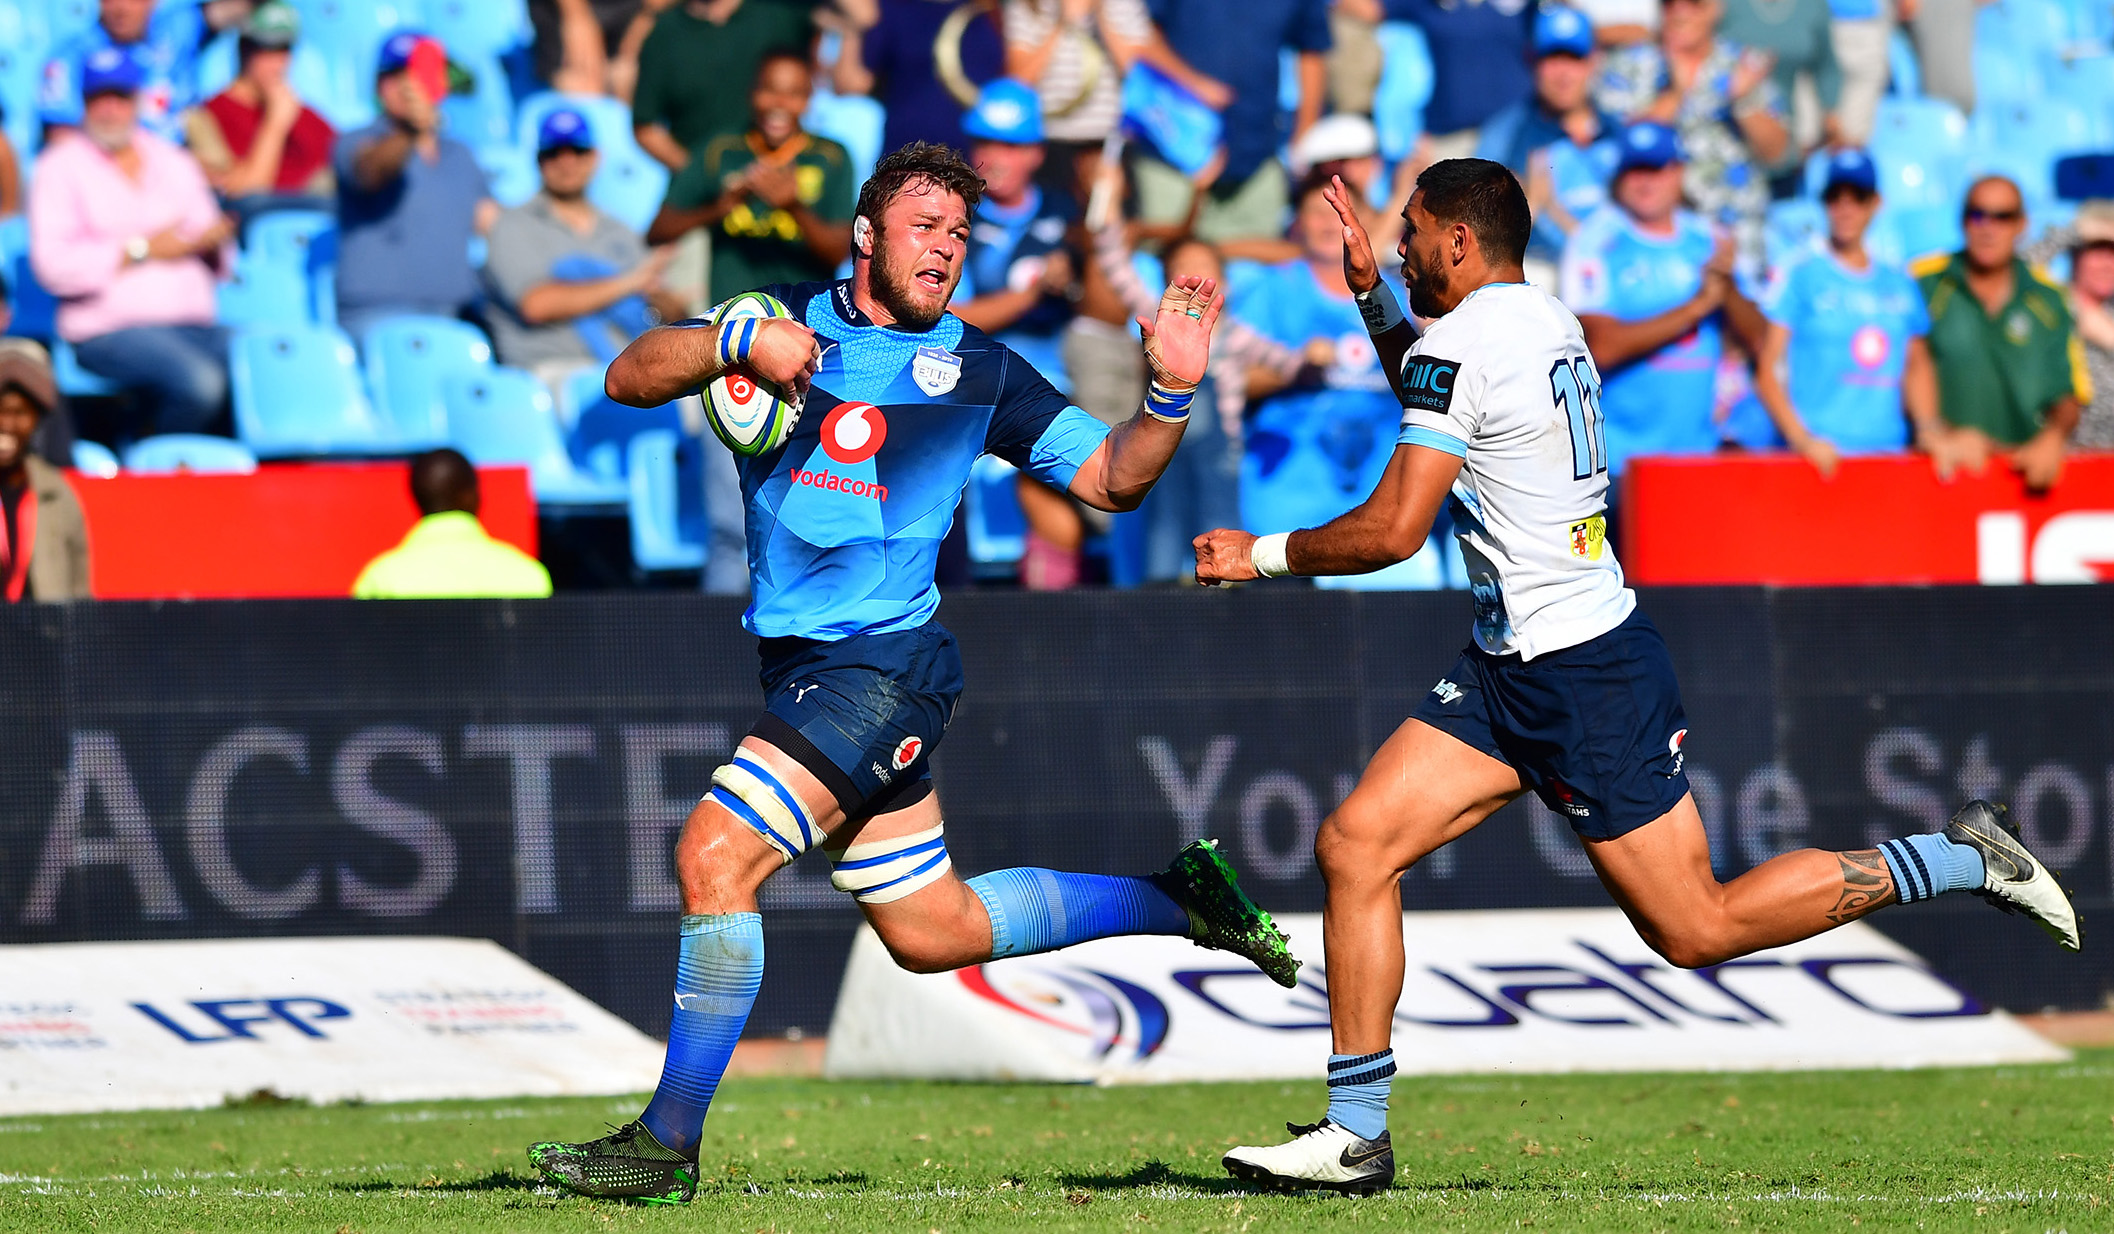 Vodacom Bulls announce 30 man squad to face Cell C Sharks at Vodacom Super Fan Saturday